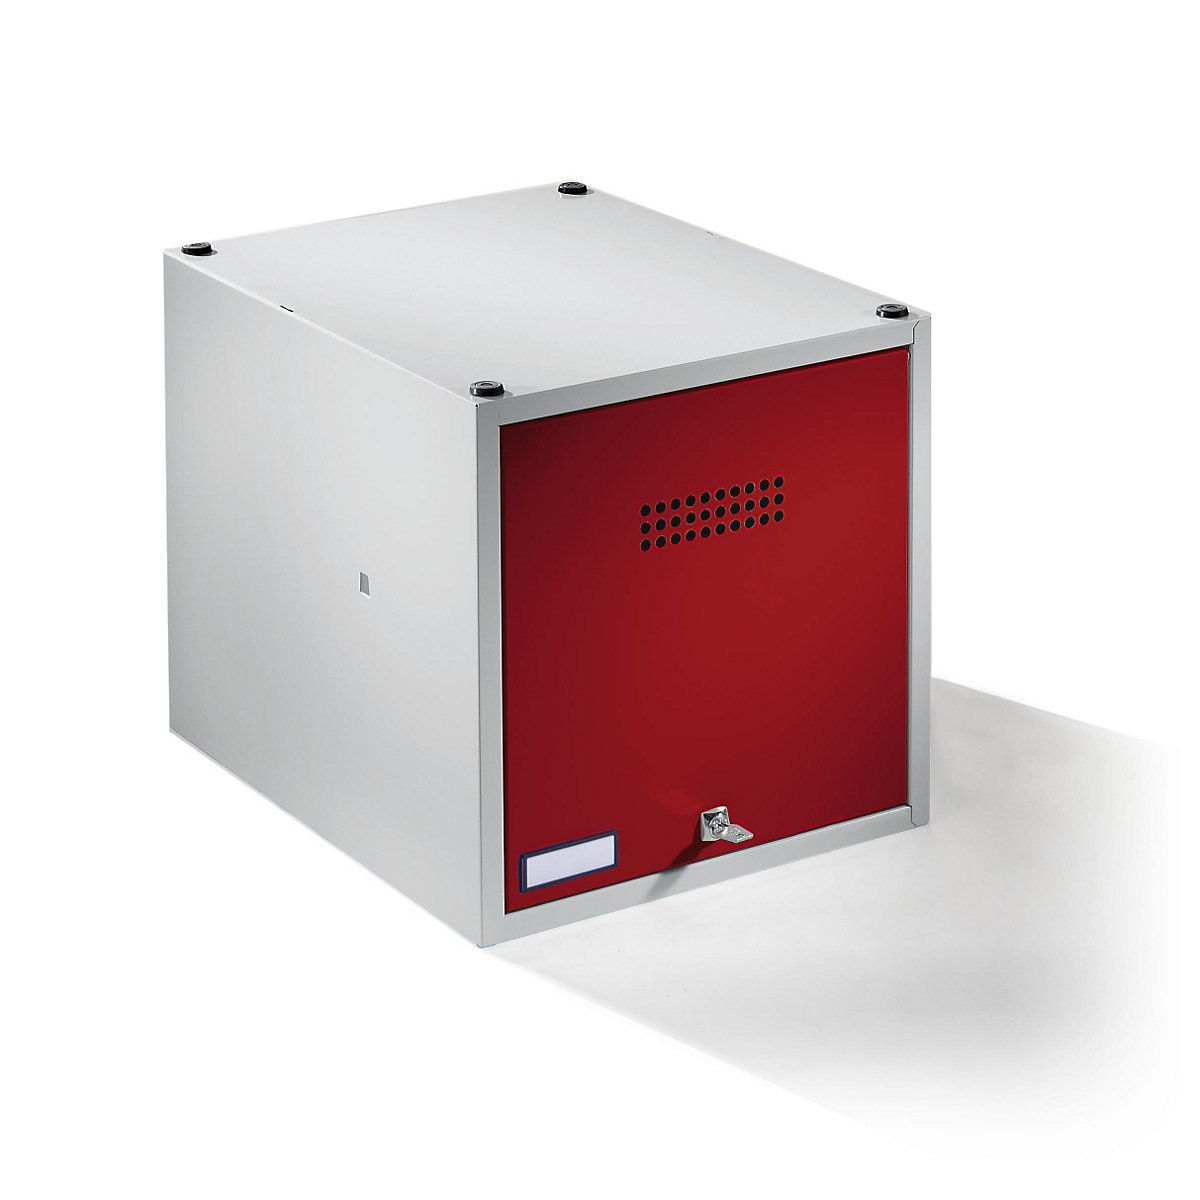 Individual locker, can be expanded – Wolf, HxWxD 400 x 400 x 500 mm, with security cylinder lock, door flame red-10